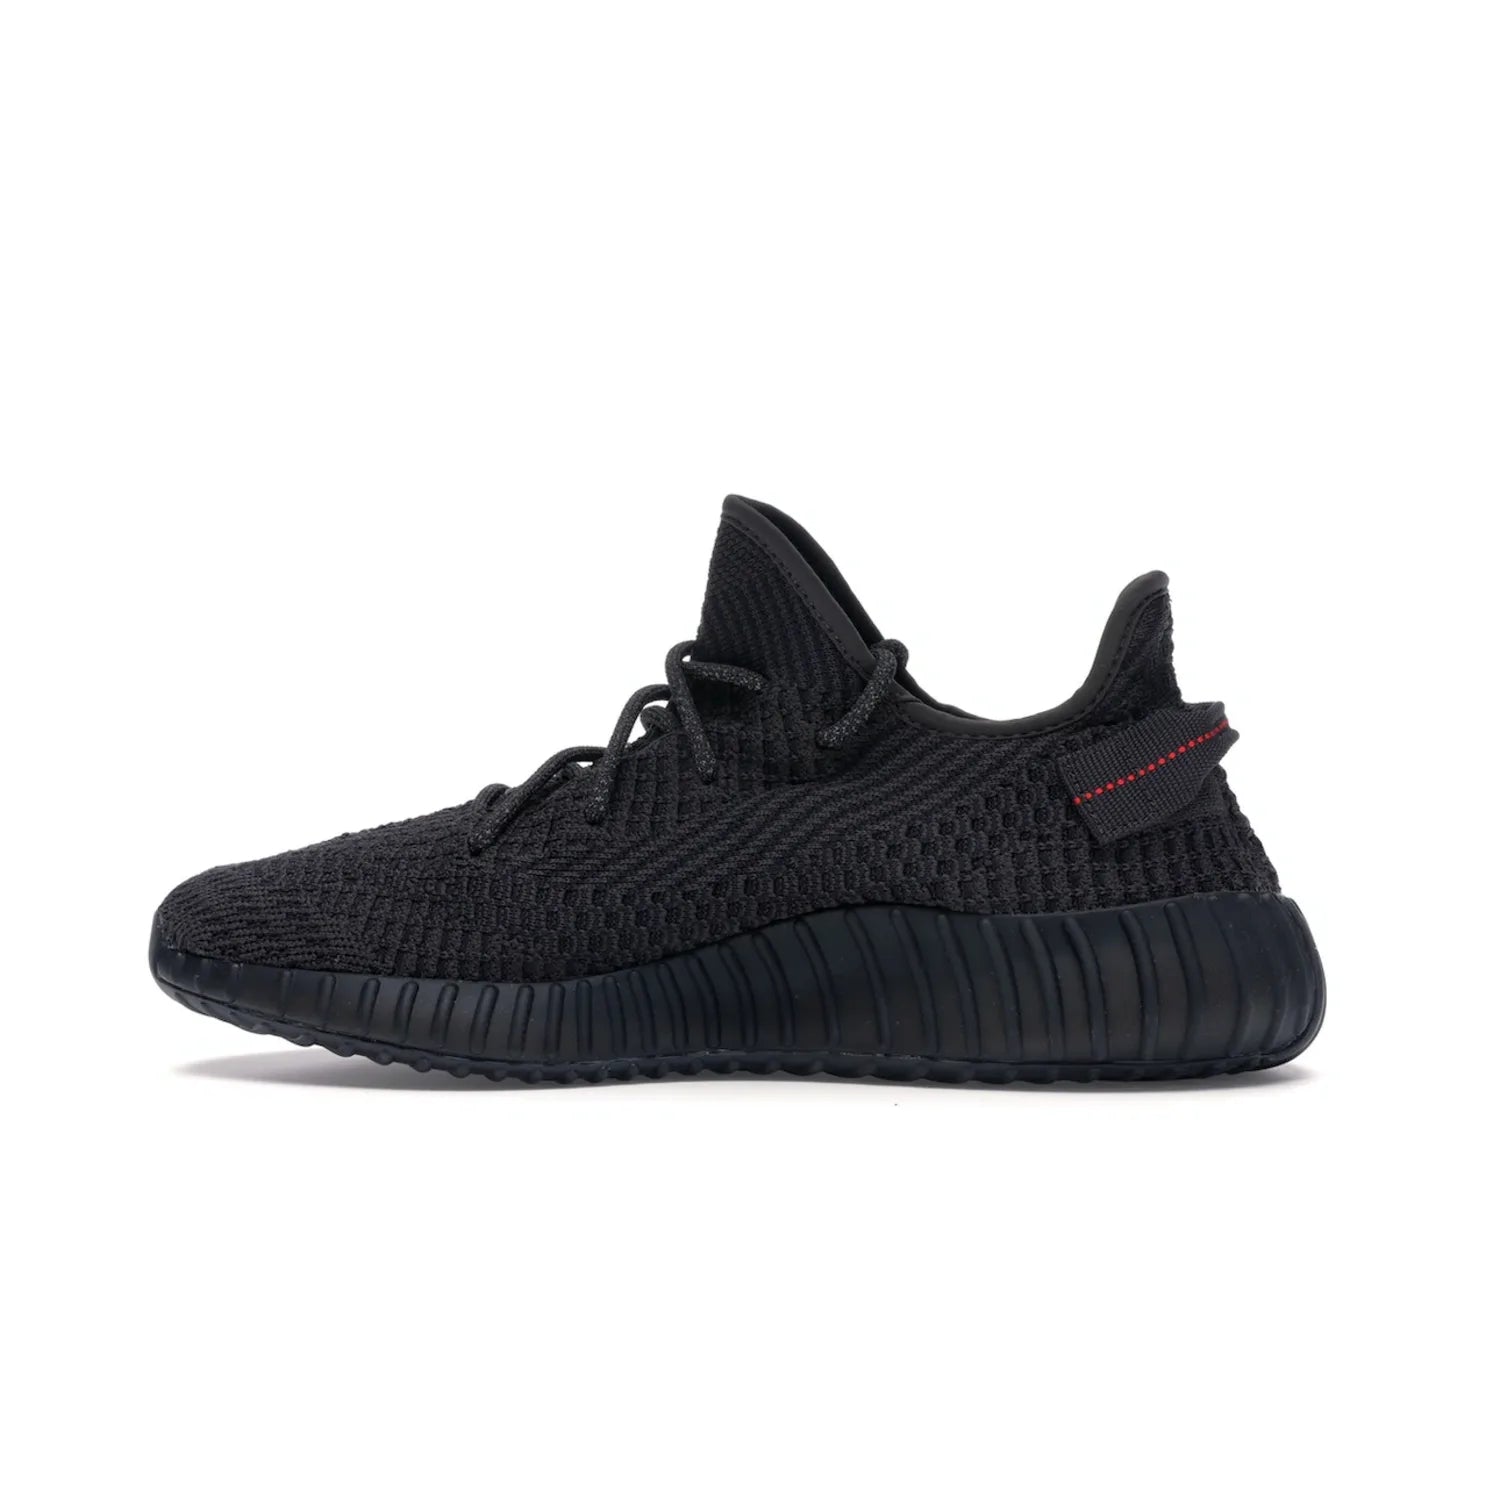 adidas Yeezy Boost 350 V2 Black (Non-Reflective) - Image 20 - Only at www.BallersClubKickz.com - A timeless, sleek silhouette crafted from quality materials. The adidas Yeezy Boost 350 V2 Black (Non-Reflective) brings style and sophistication. Get yours now!